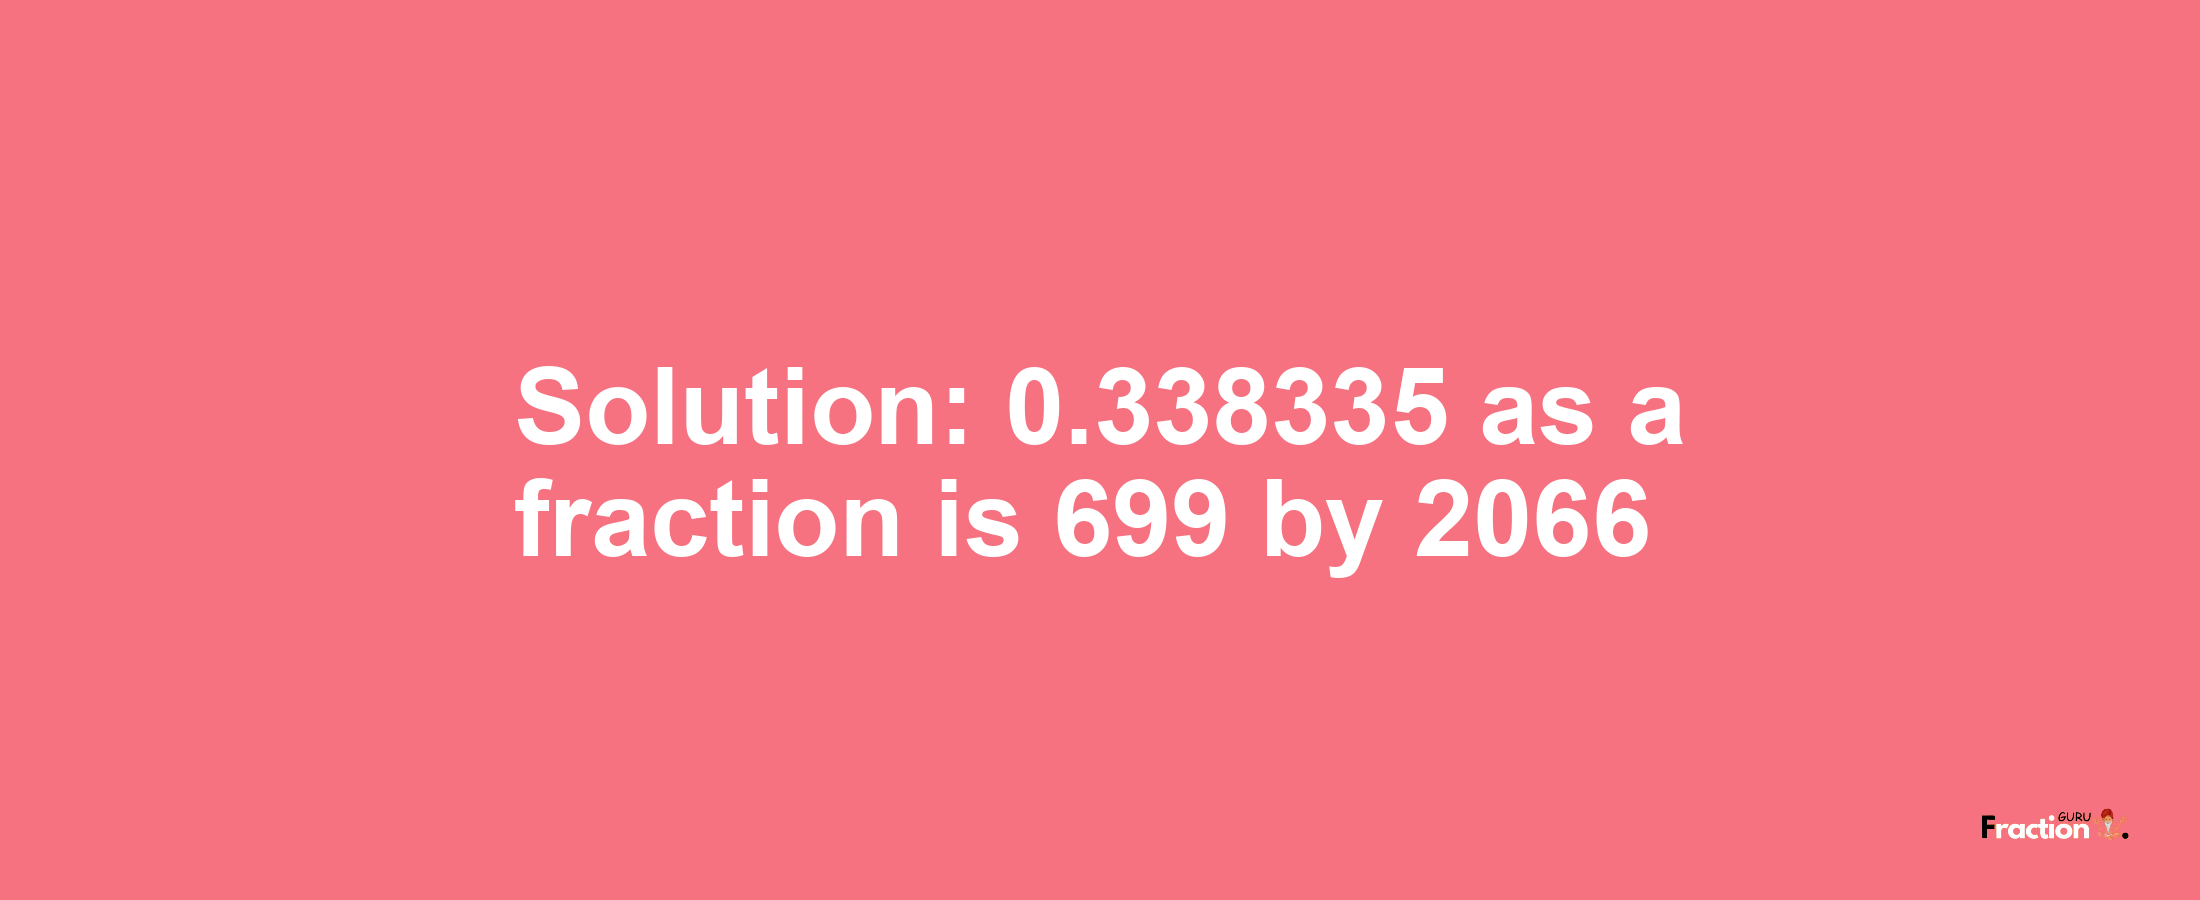 Solution:0.338335 as a fraction is 699/2066